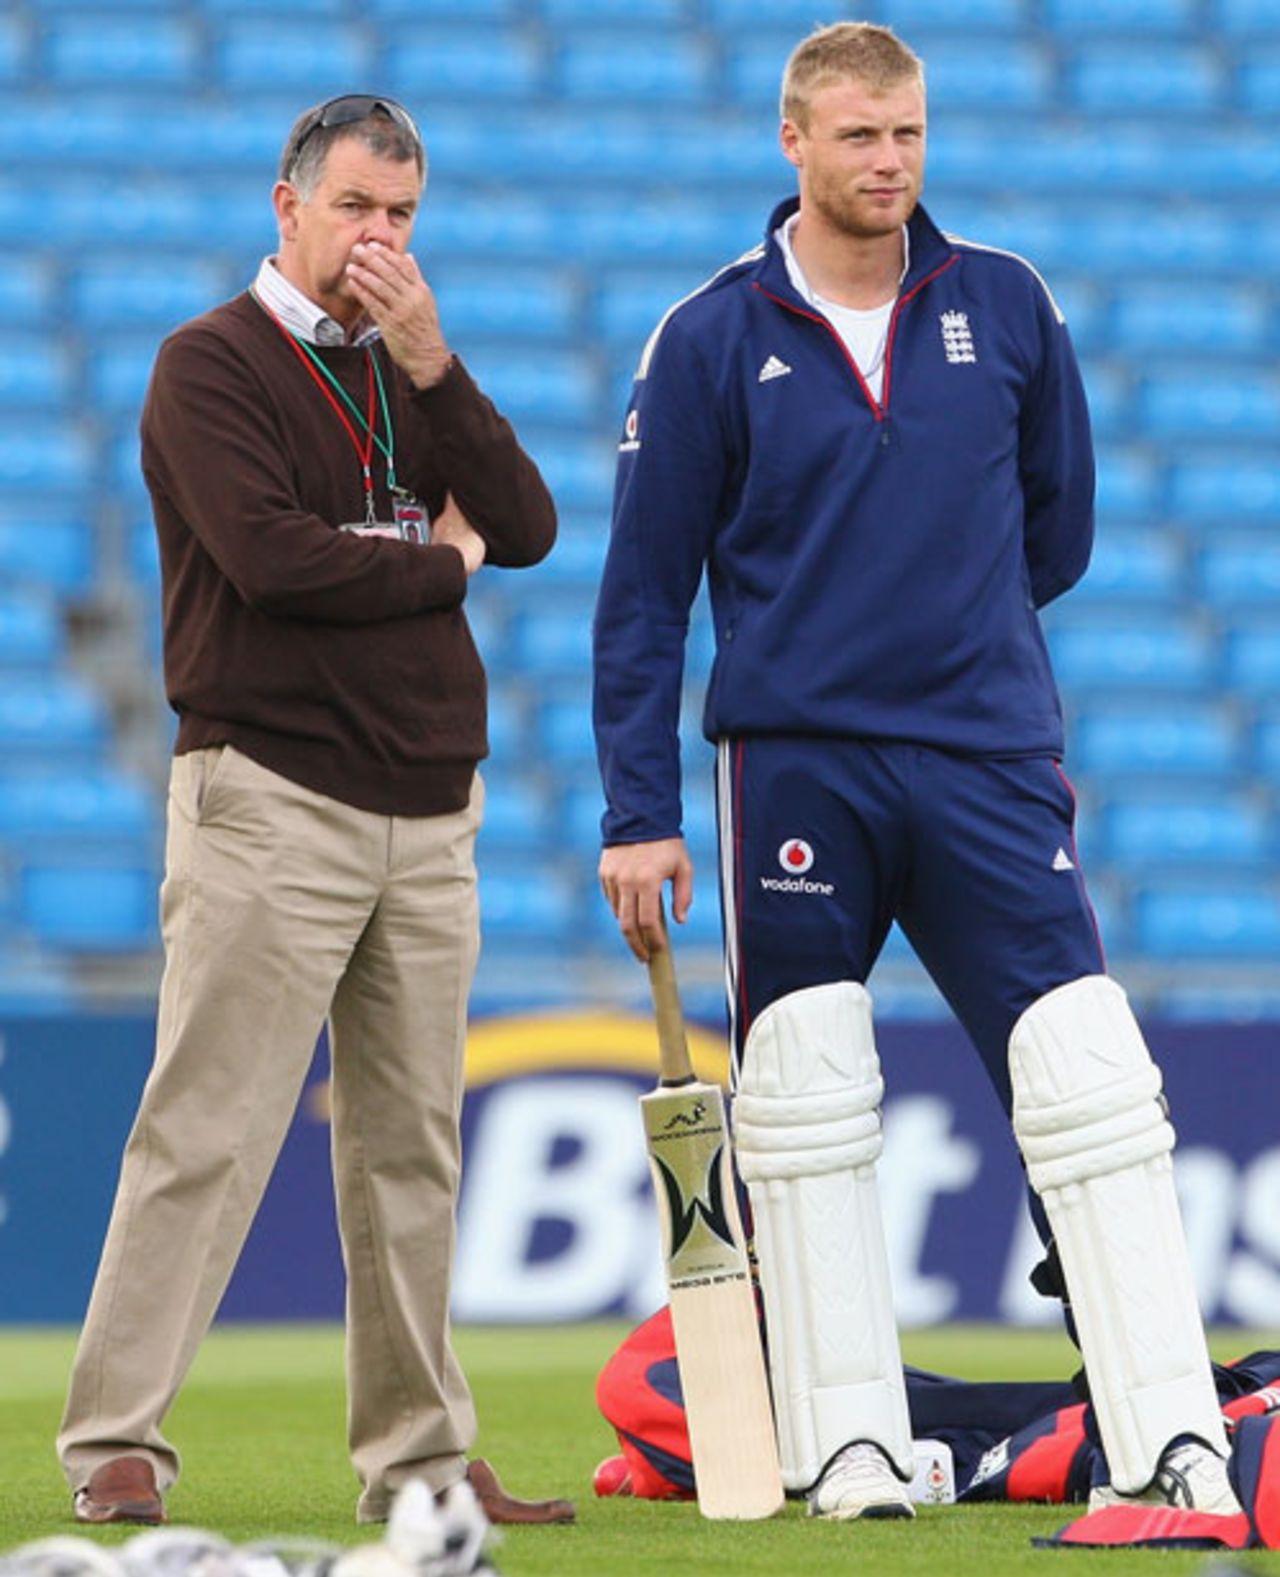 Geoff Miller and Andrew Flintoff ponder life in the Headingley nets ahead of the second Test, Headingley, July 16, 2008